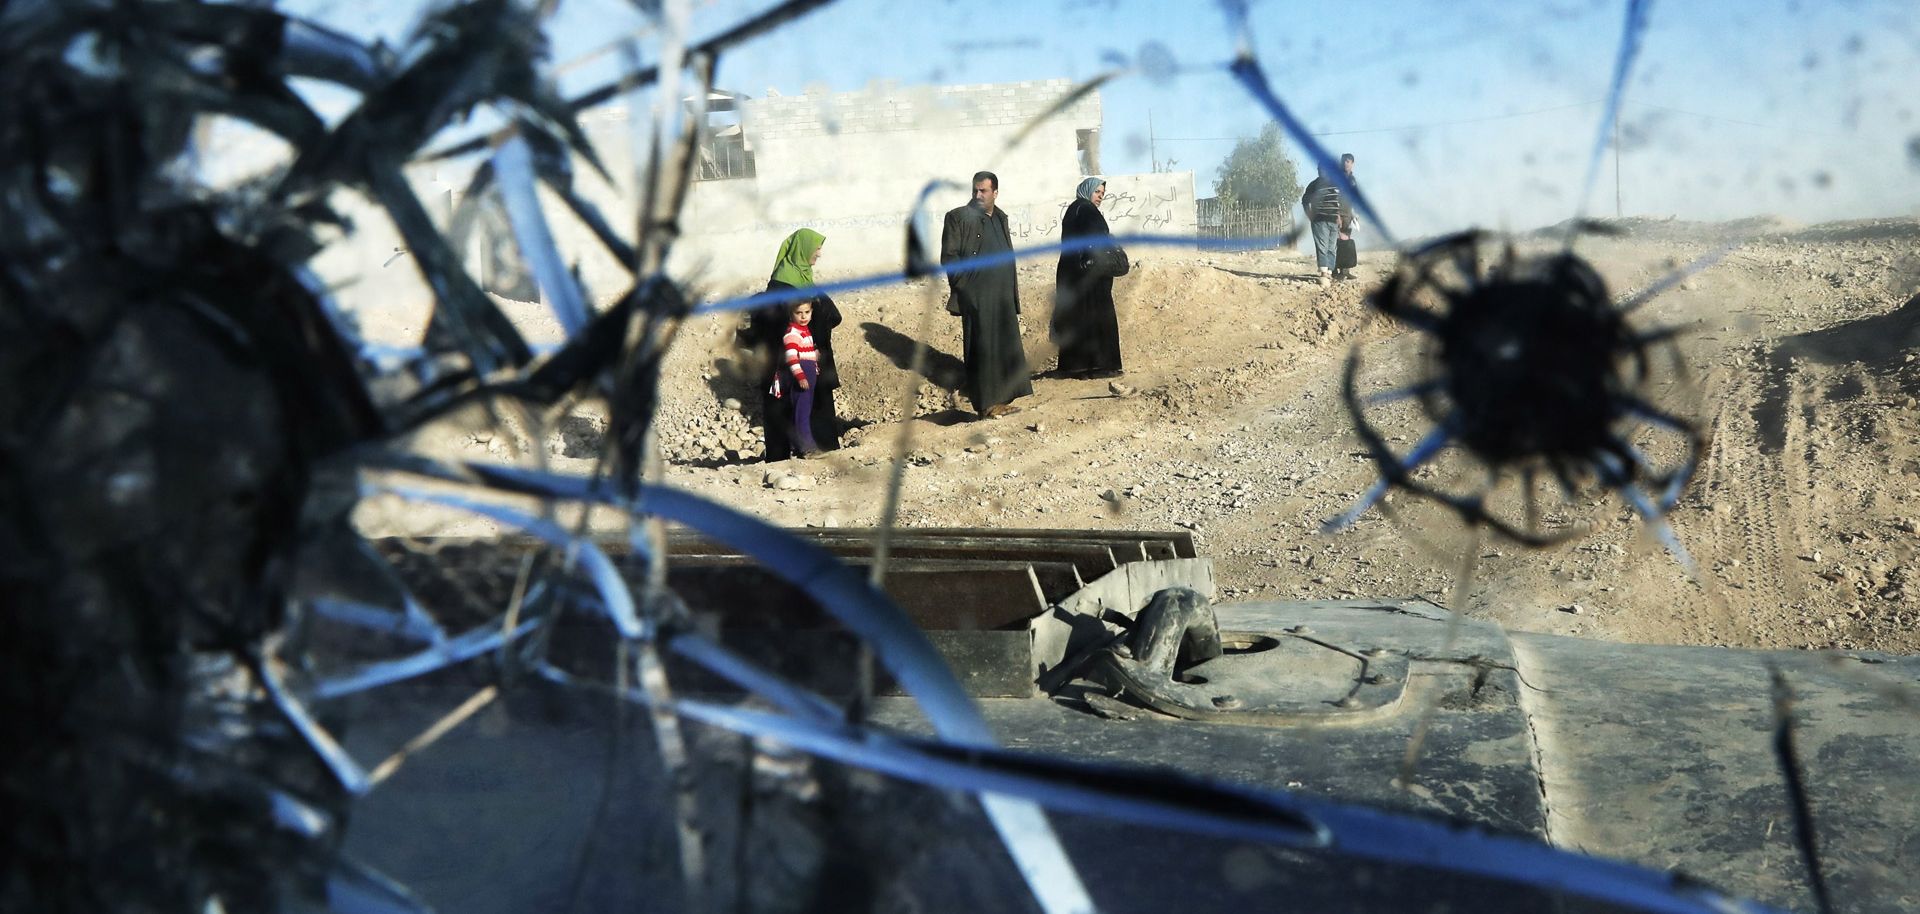 A picture taken through a vehicle's bullet-riddled windshield shows Mosul after Iraqi troops retook most of the city from the Islamic State. The group's so-called caliphate looks nothing like the caliphates of old, which thrived on diversity.